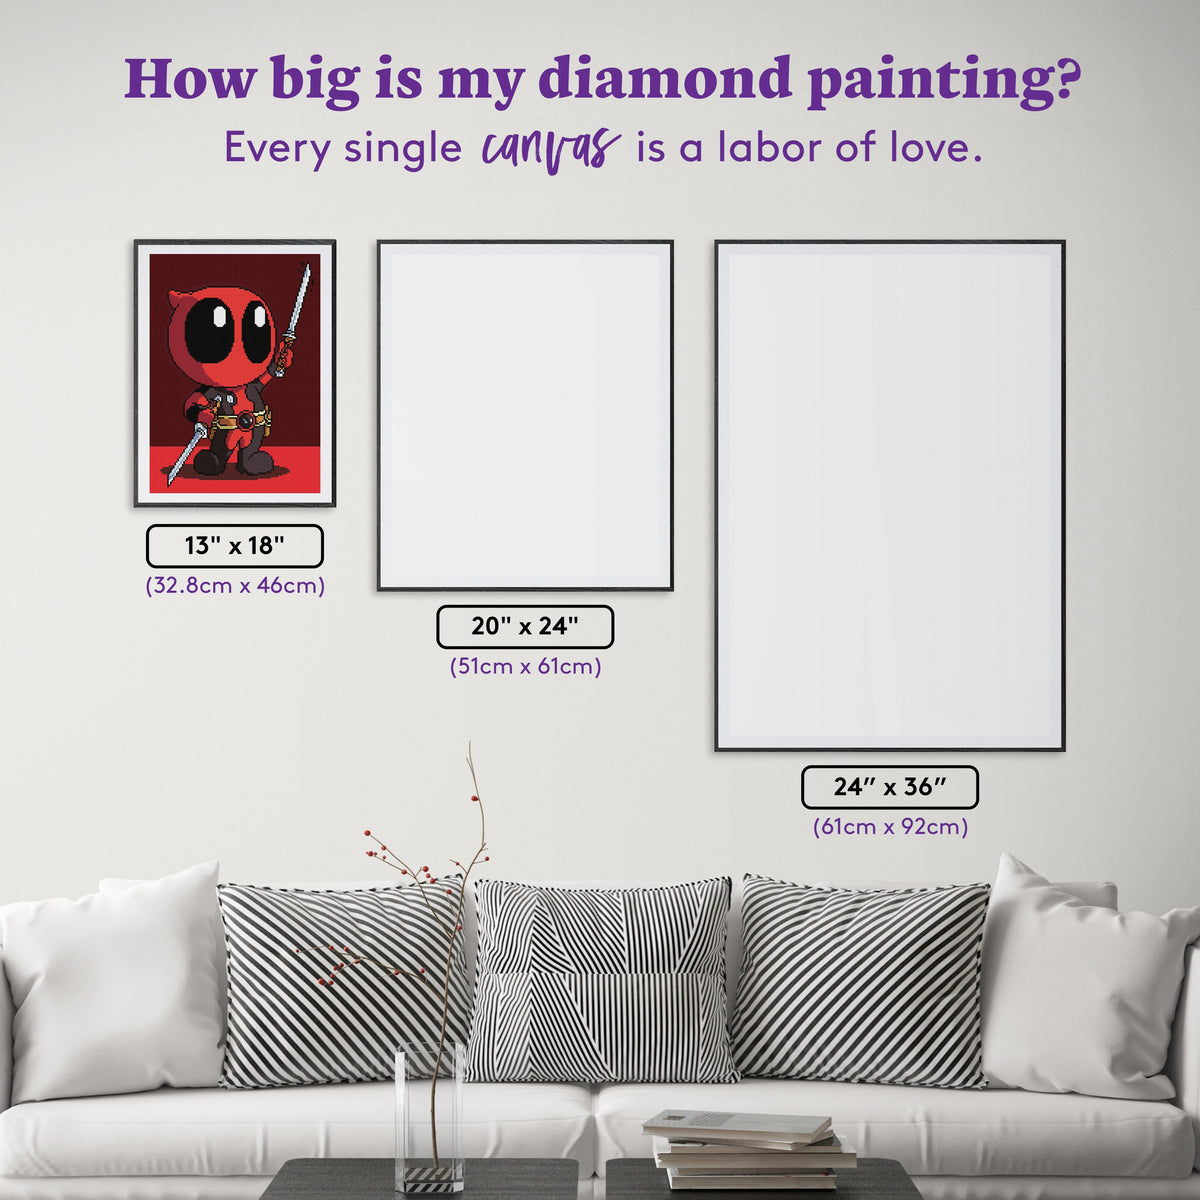 Diamond Painting Deadpool 13" x 18" (32.8cm x 46cm) / Round with 15 Colors including 3 ABs / 19,188